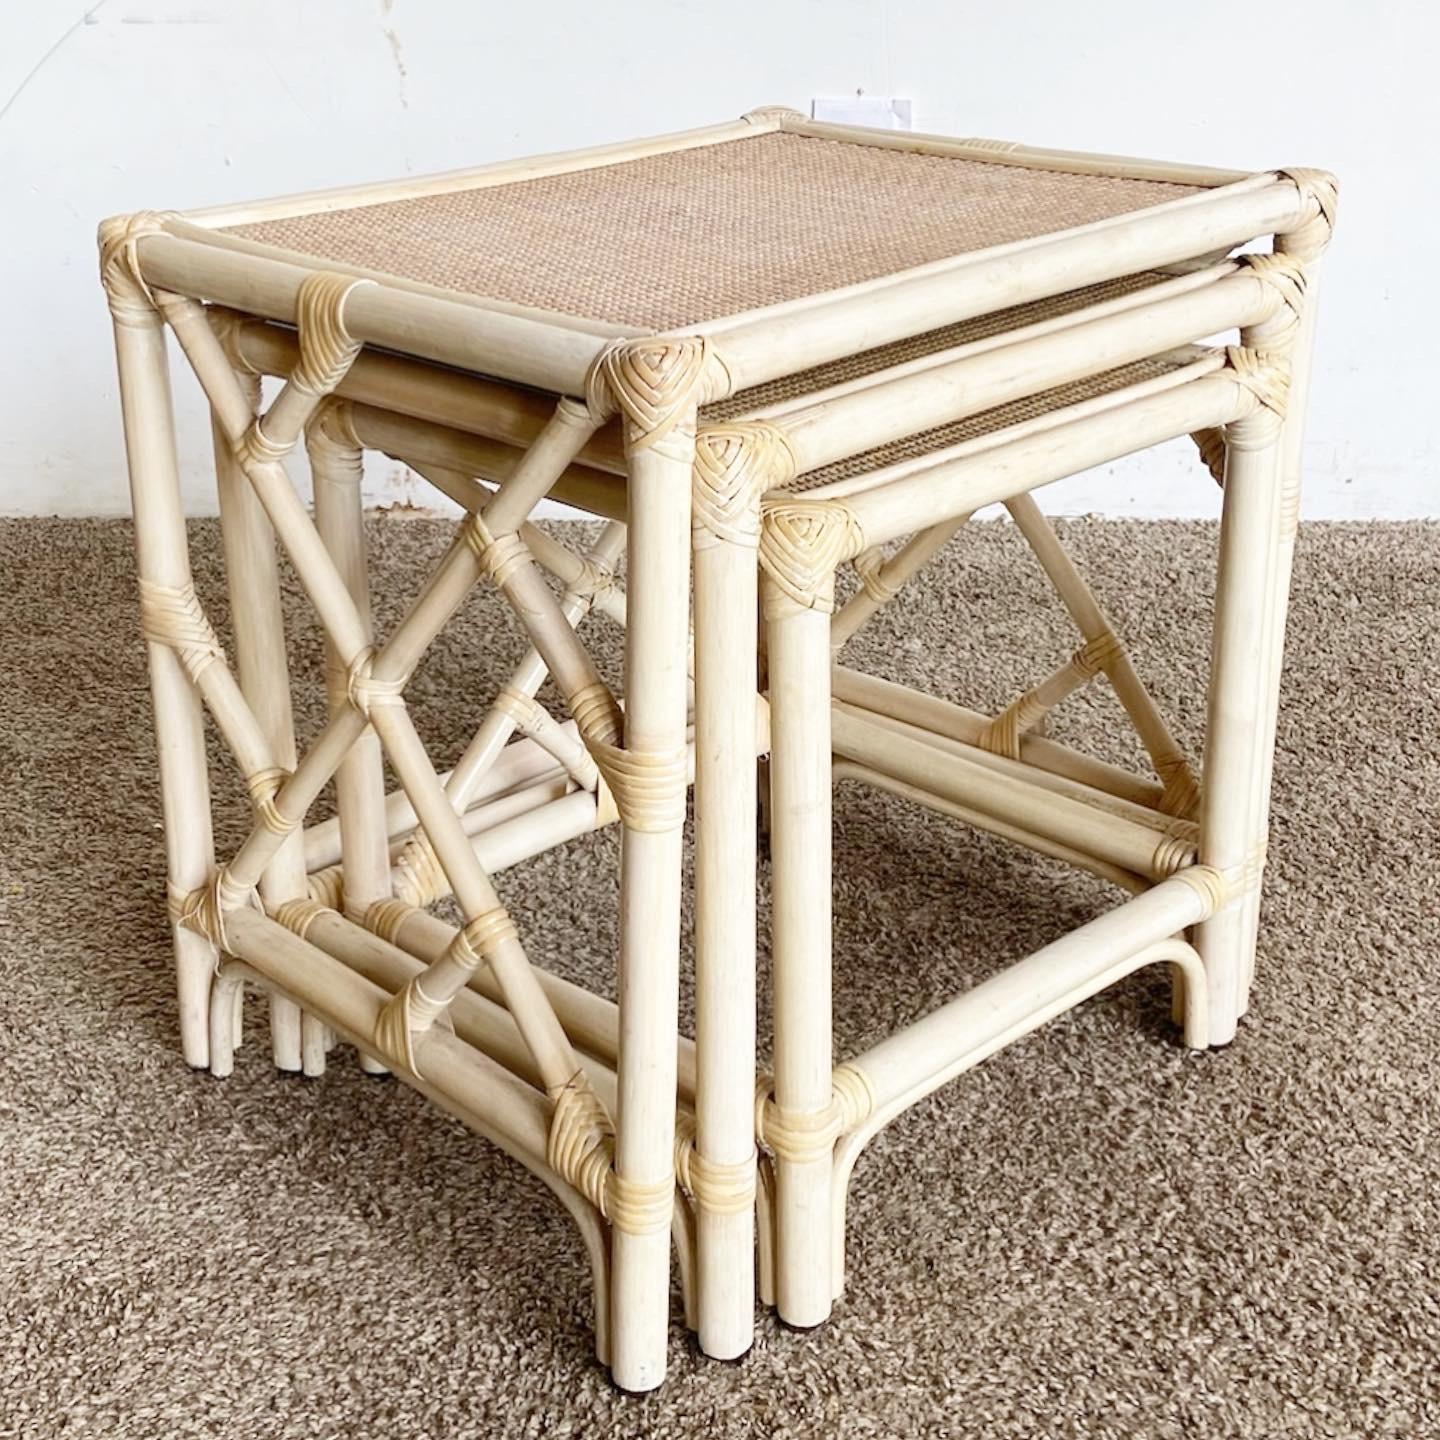 Add eclectic elegance with our Boho Chic Bamboo Rattan Chippendale Style Nesting Tables. A blend of traditional design and bohemian texture.
Minor wear around the edges and legs as seen in the photos.